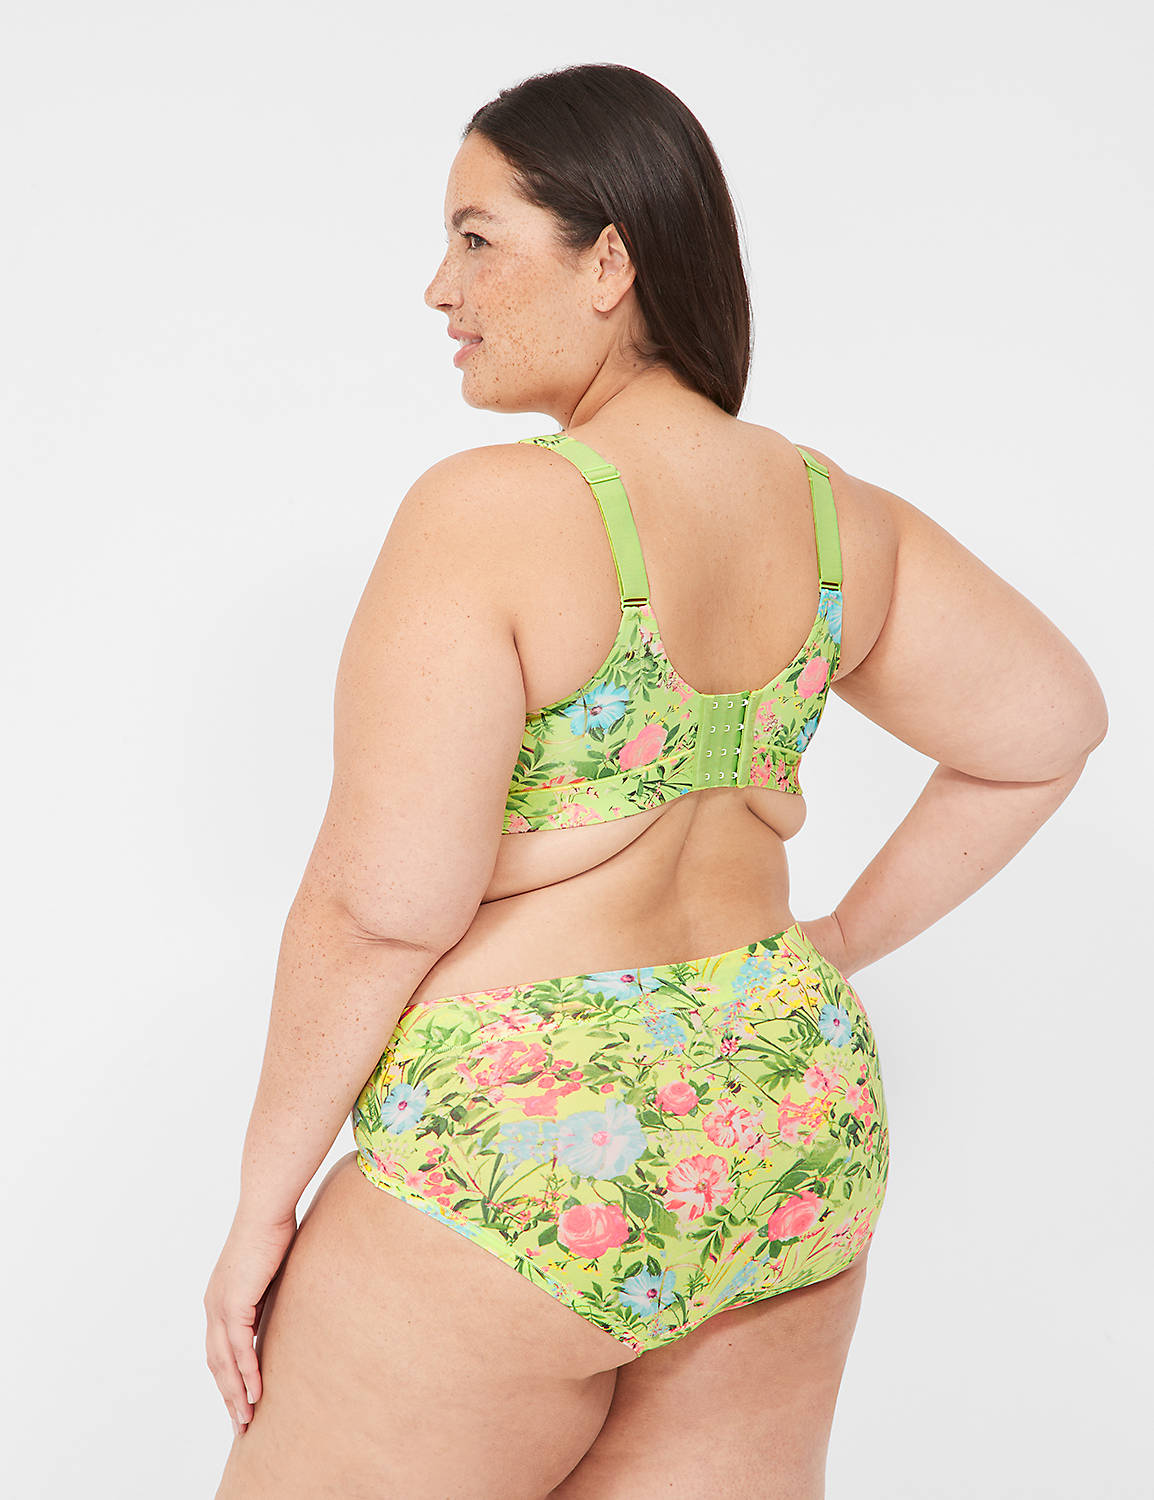 Comfort Bliss LL Plunge Print R 113 Product Image 2